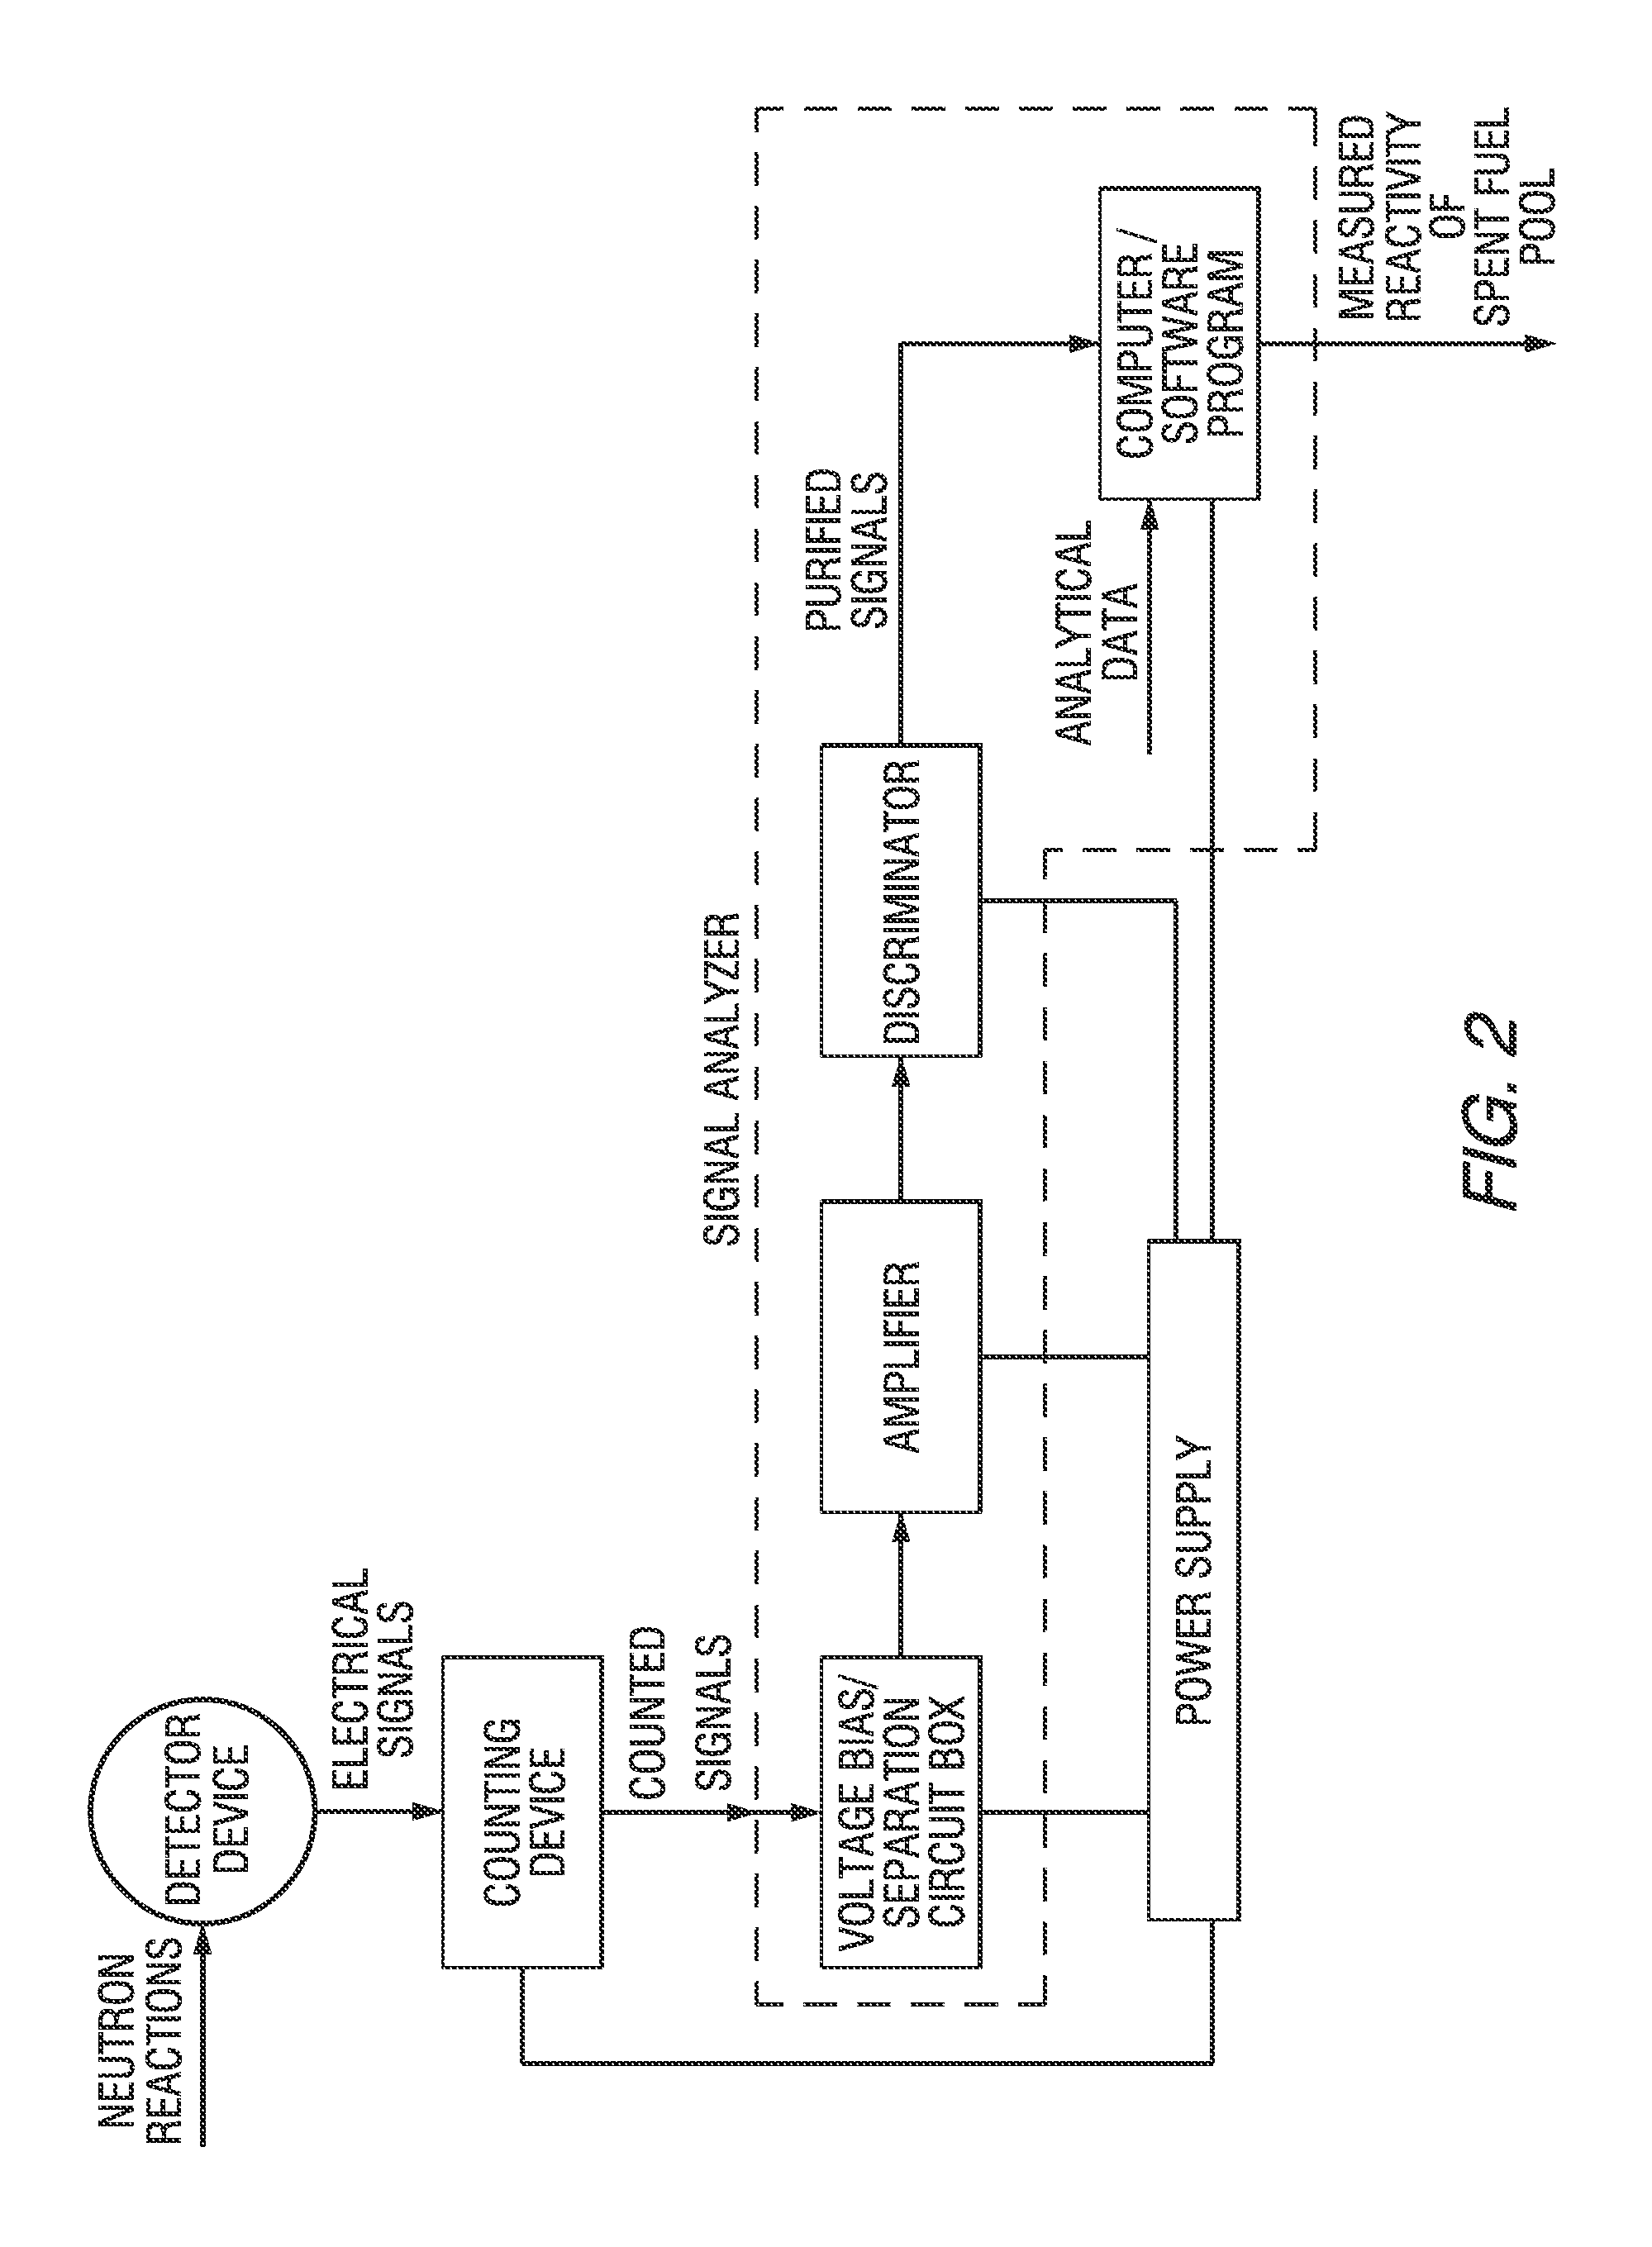 Systems and methods for spent fuel pool subcriticality measurement and monitoring